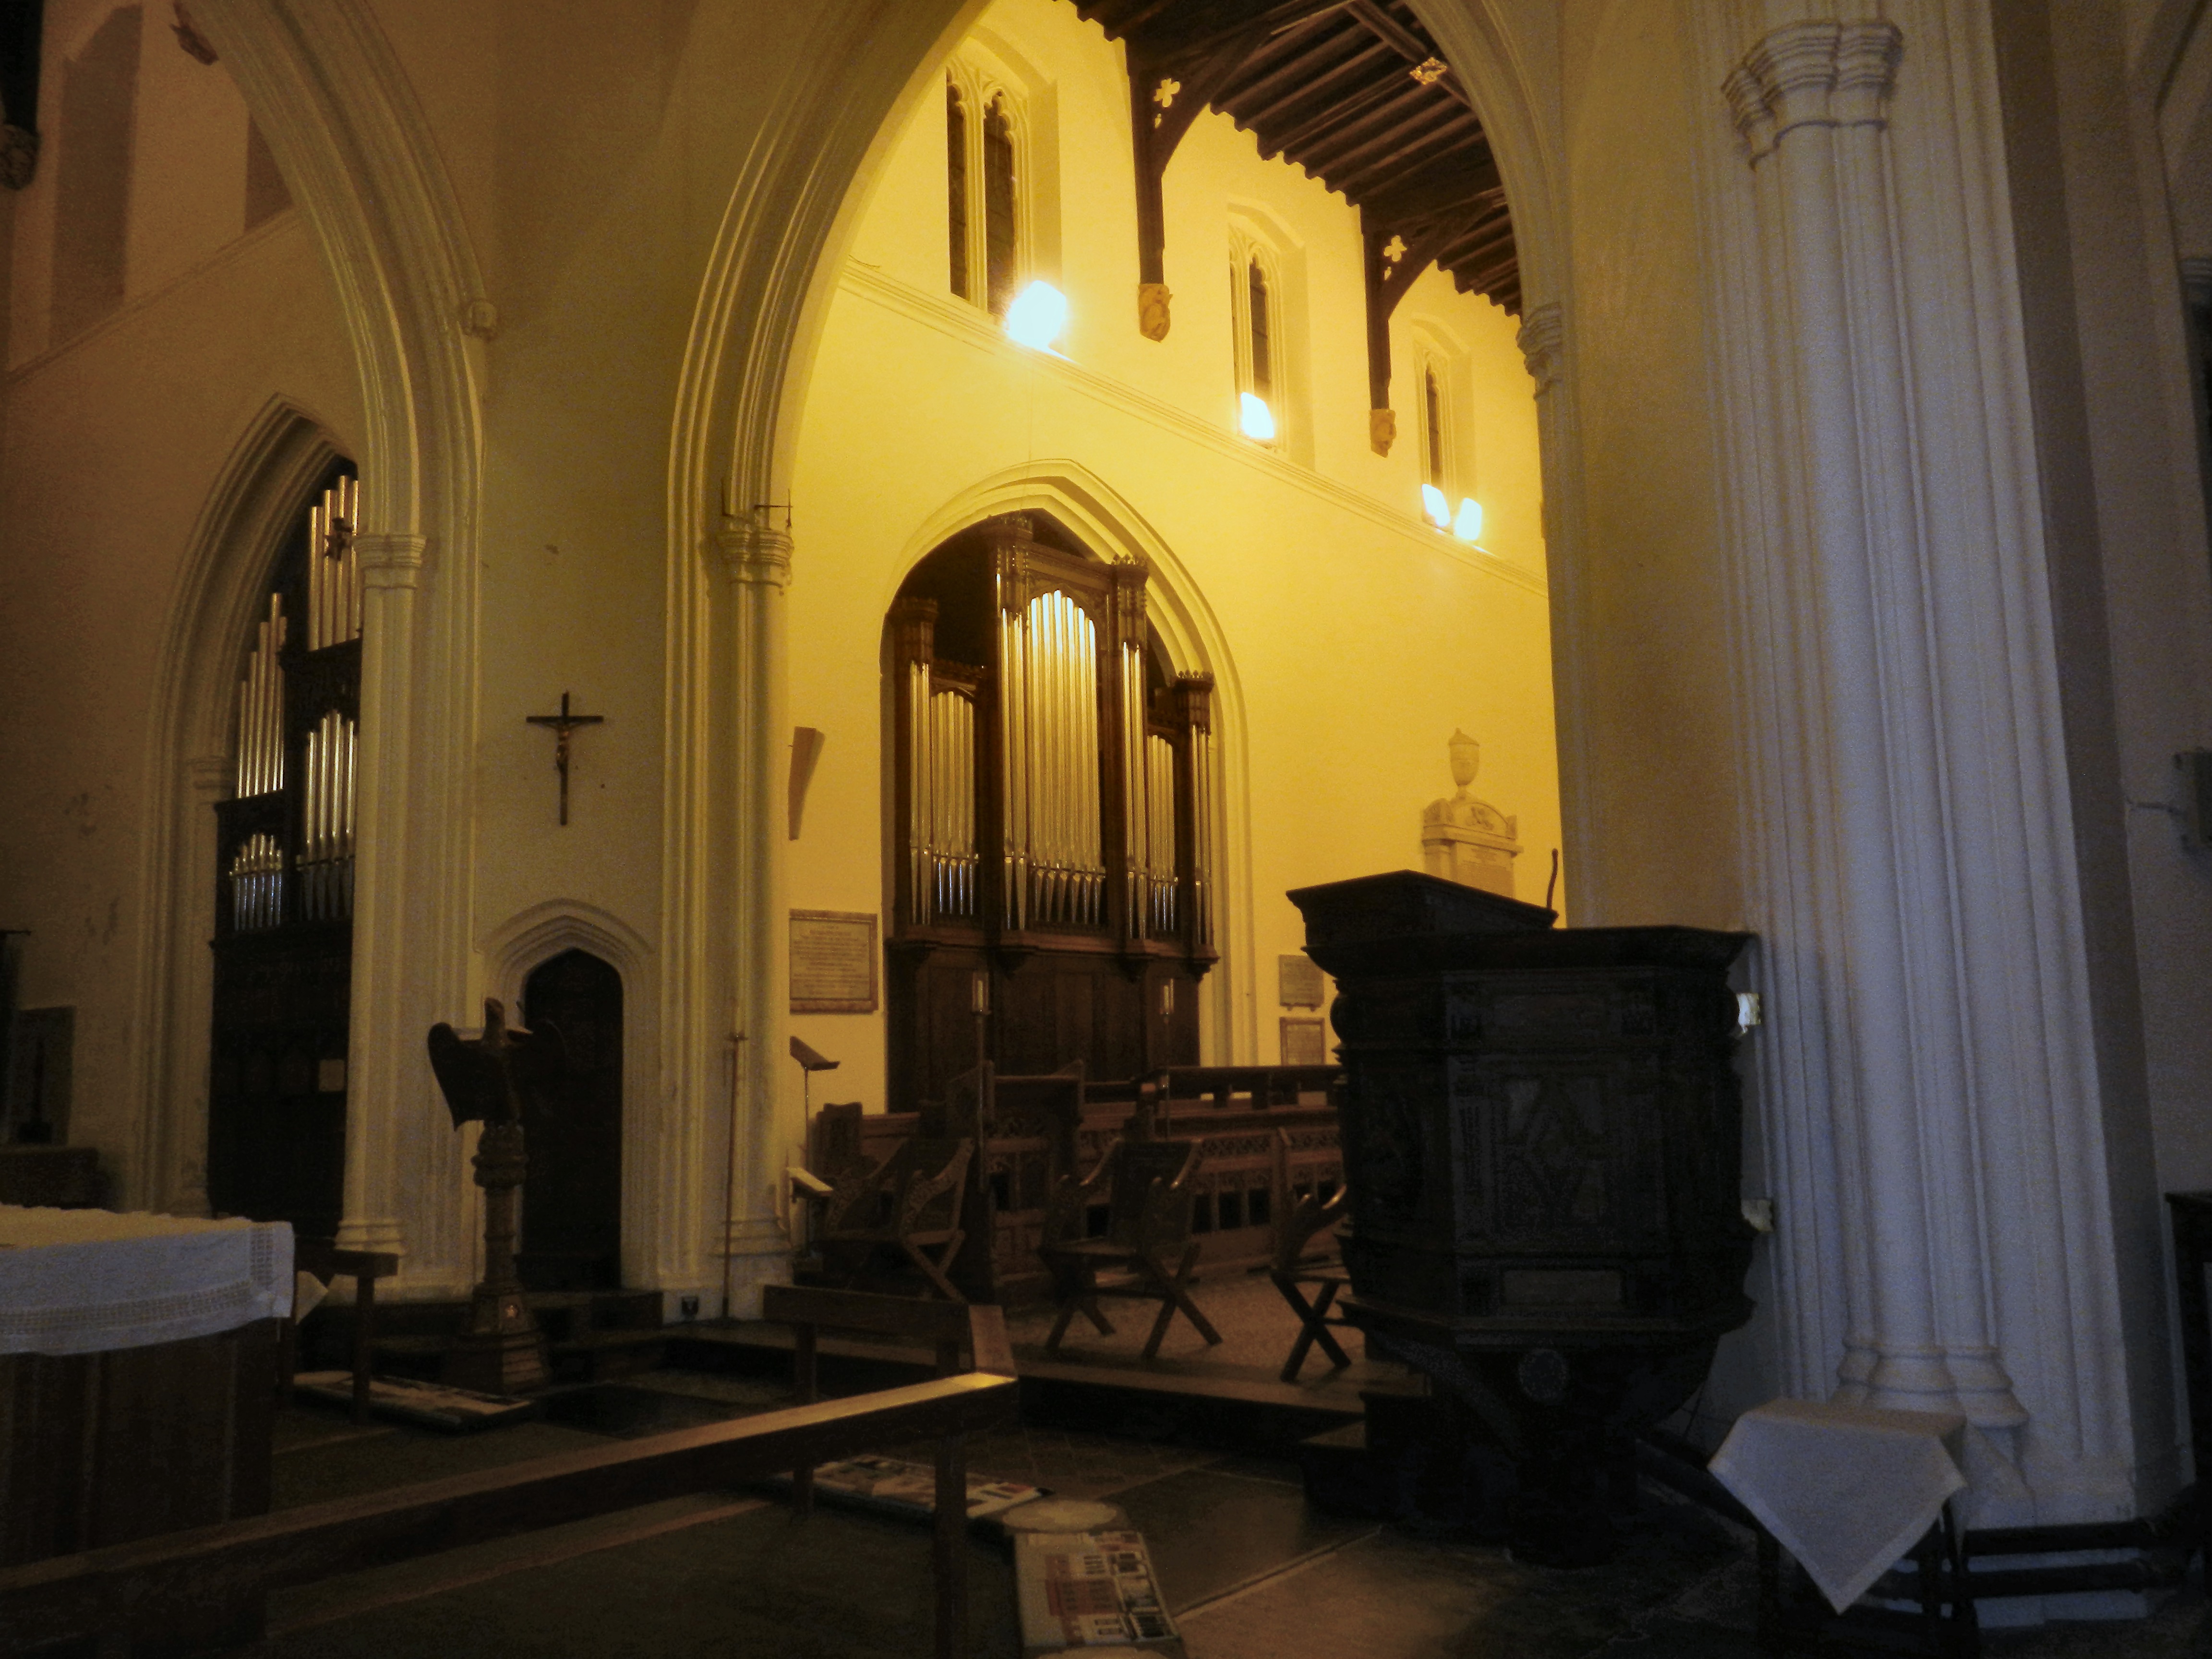 Image: The organ at St Mary's, Ware seen from the south aisle